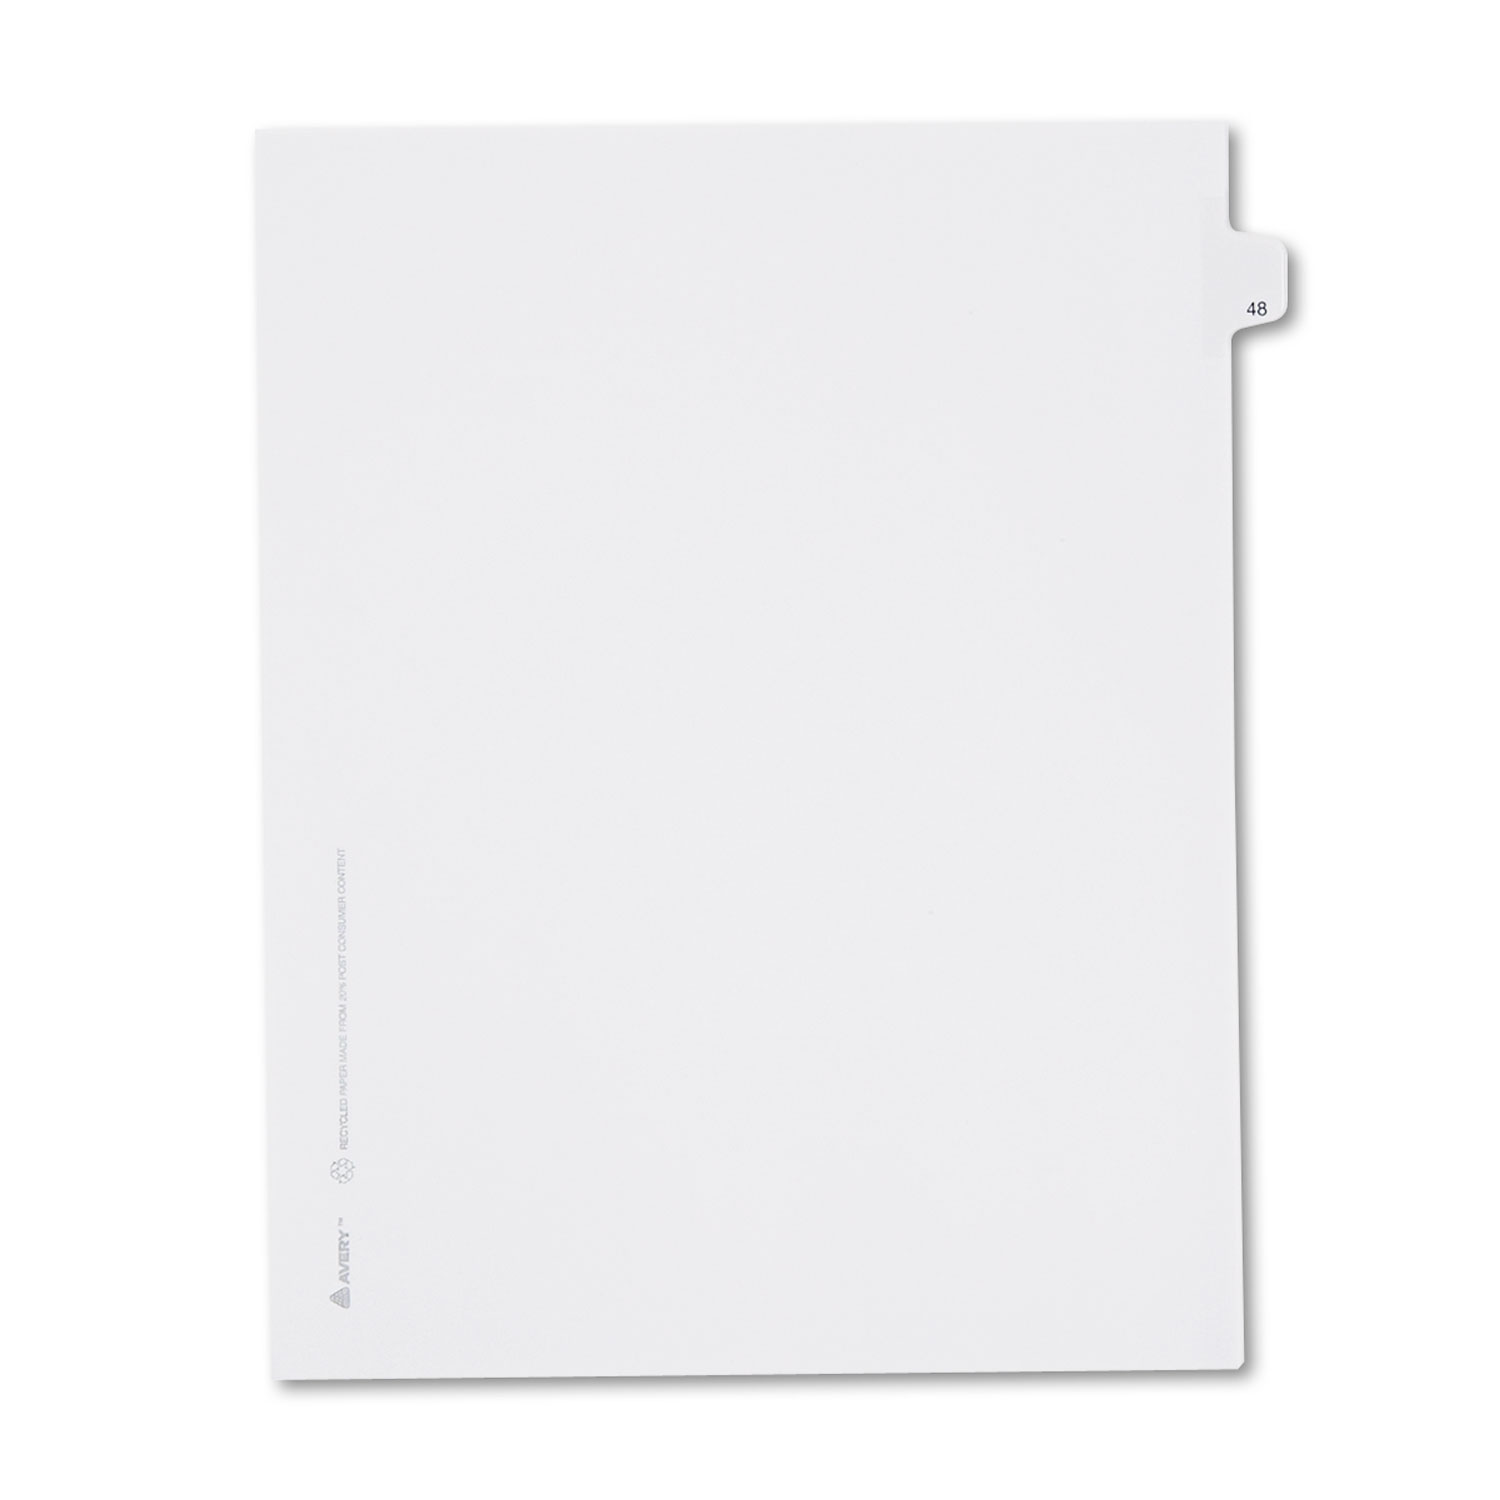 Allstate-Style Legal Exhibit Side Tab Divider, Title: 48, Letter, White, 25/Pack